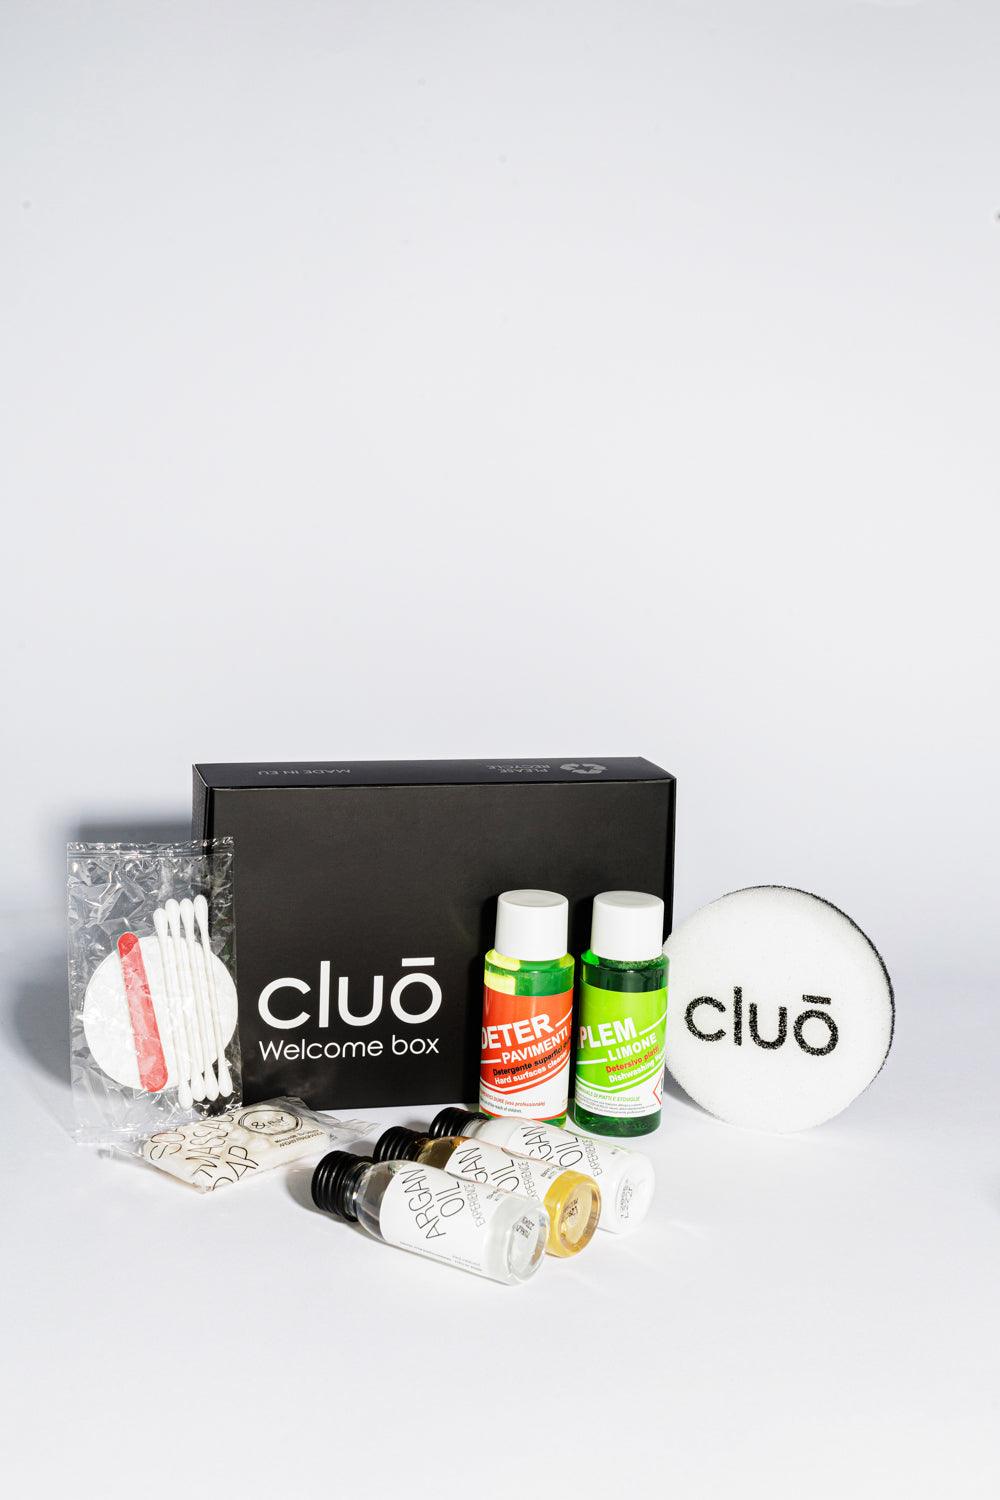 CLUO WELCOME BOX 1 *               (45.58 KN)